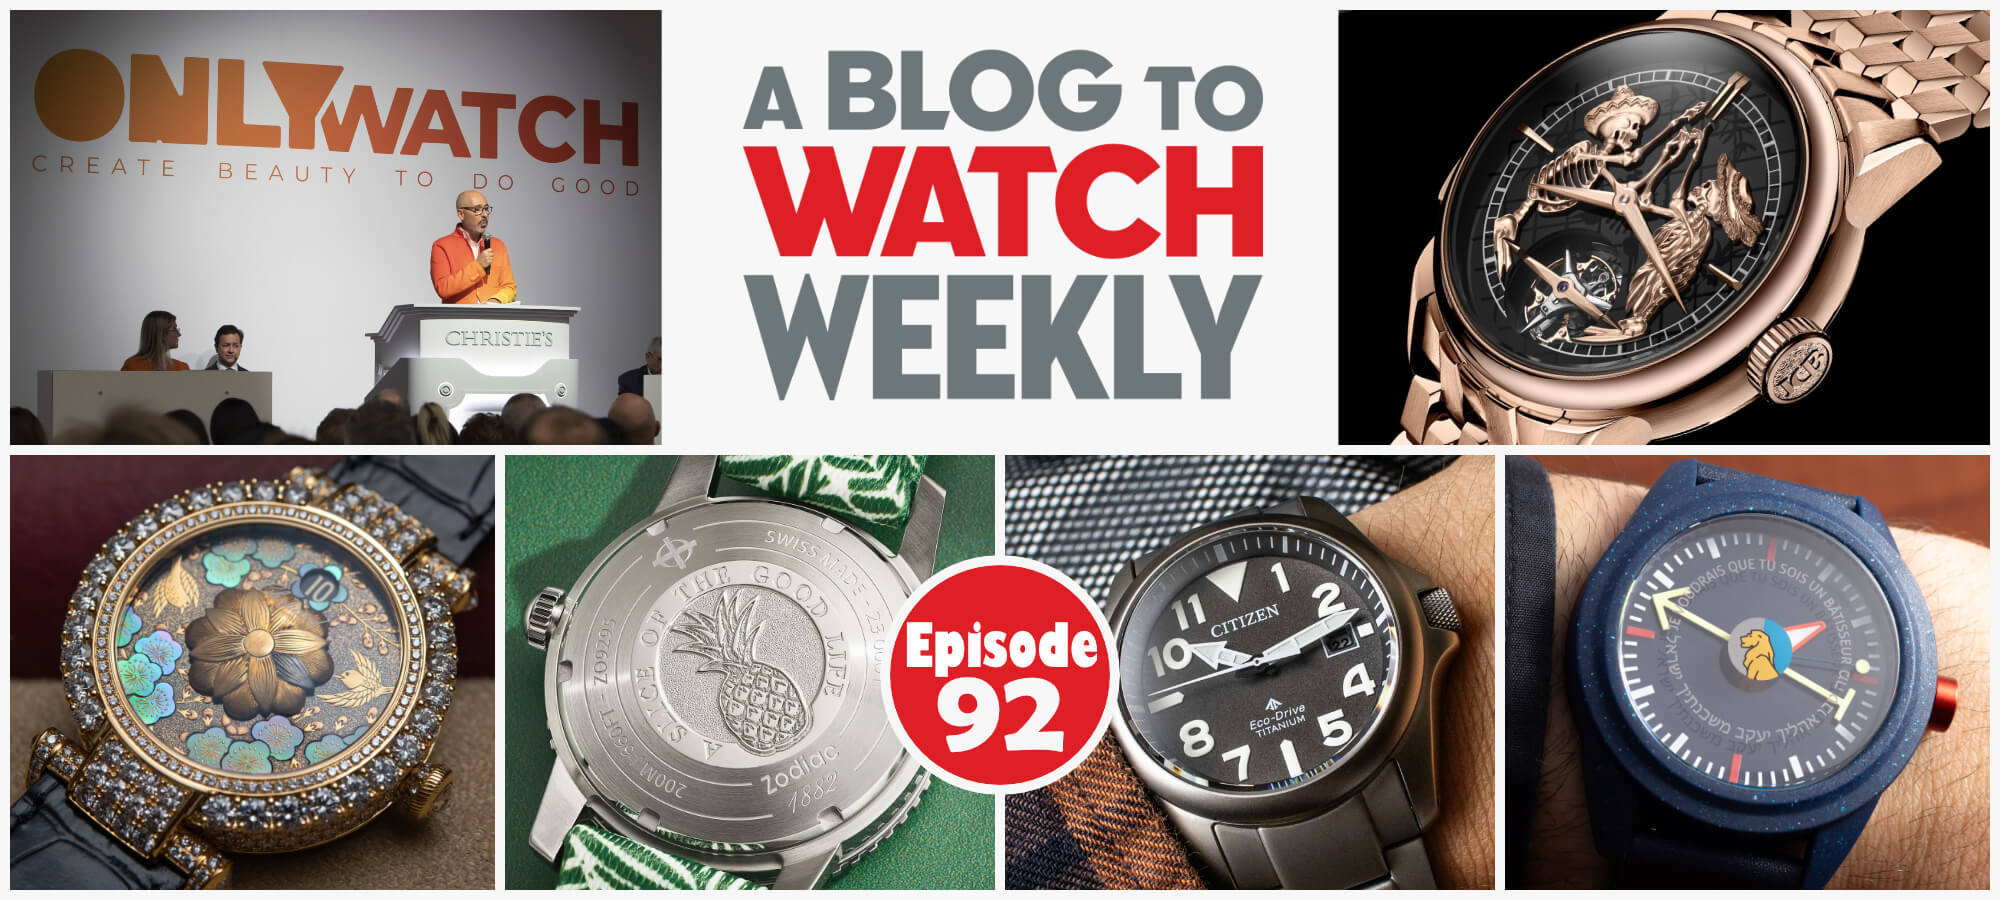 aBlogtoWatch Weekly Episode 92